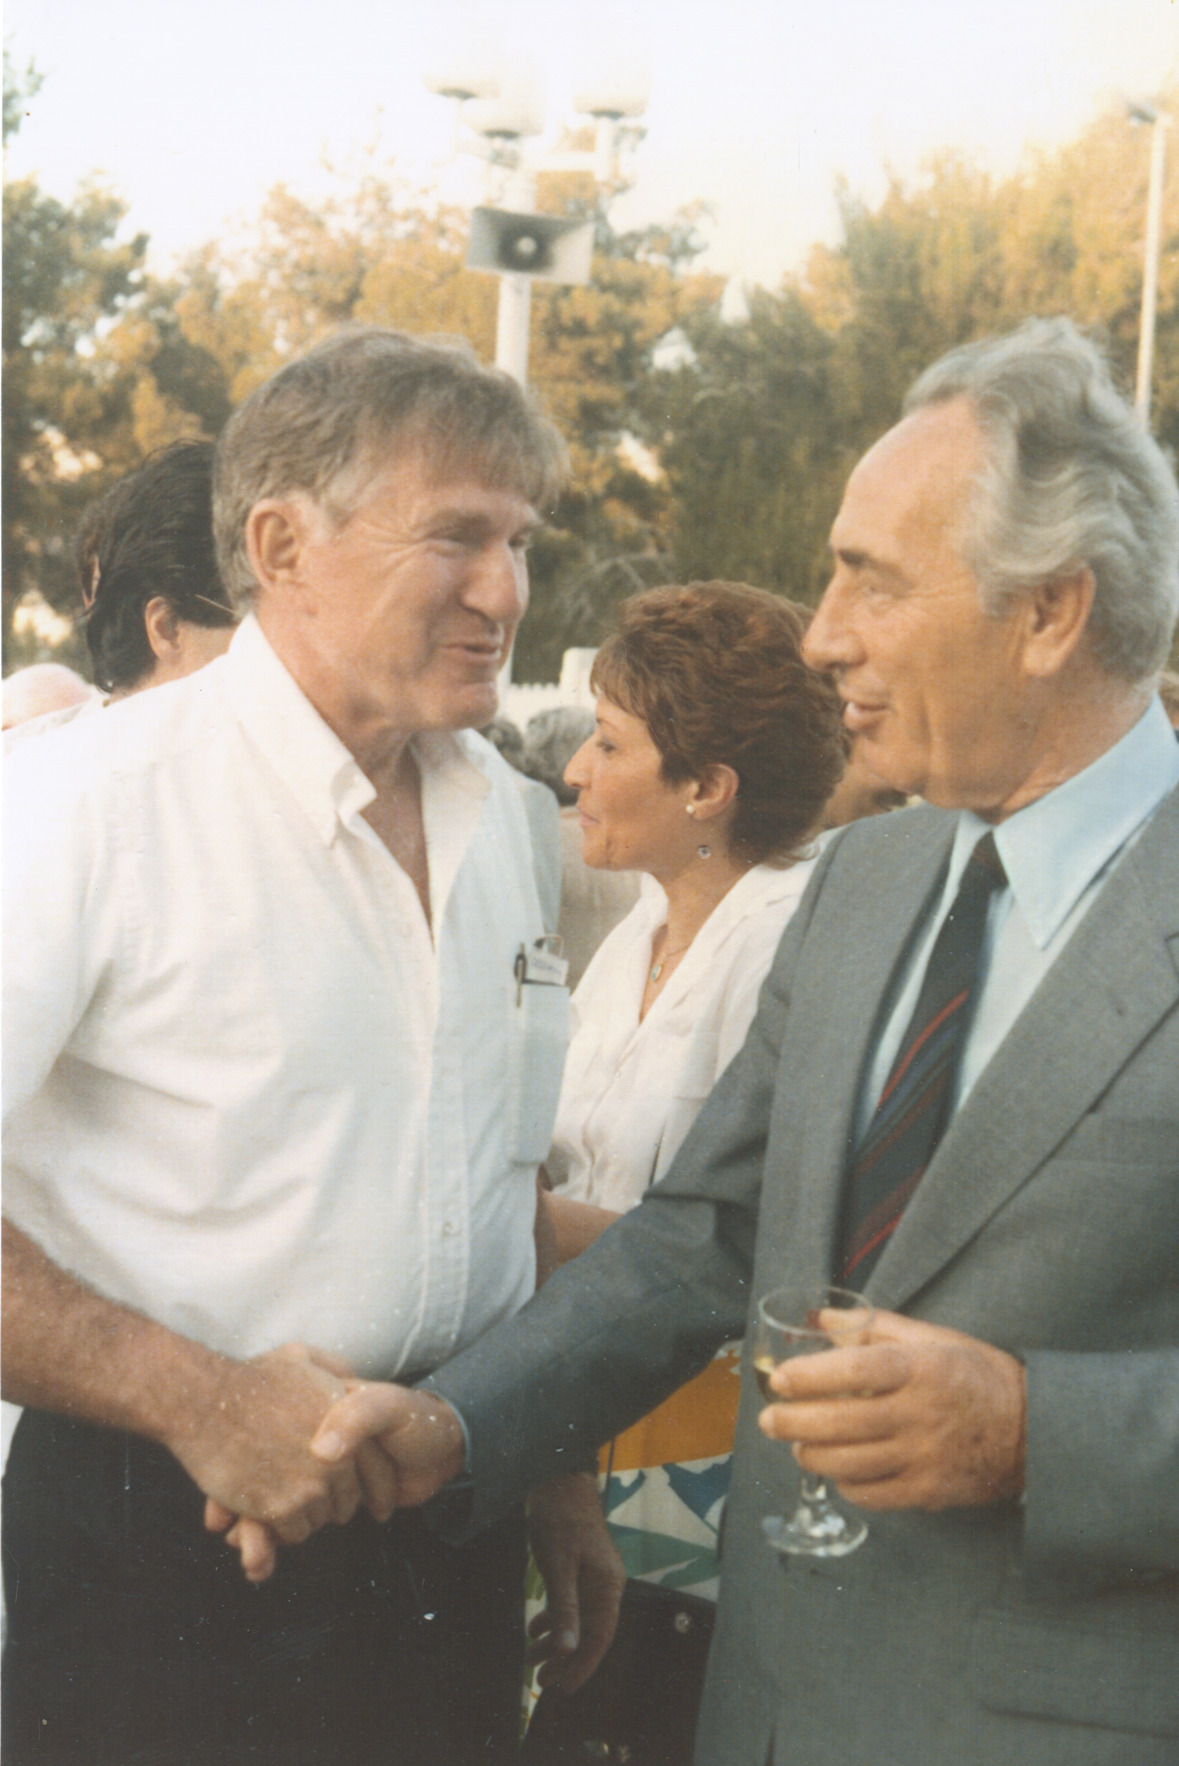 A photograph of Gettler with Prime Minister of Israel Shimon Peres